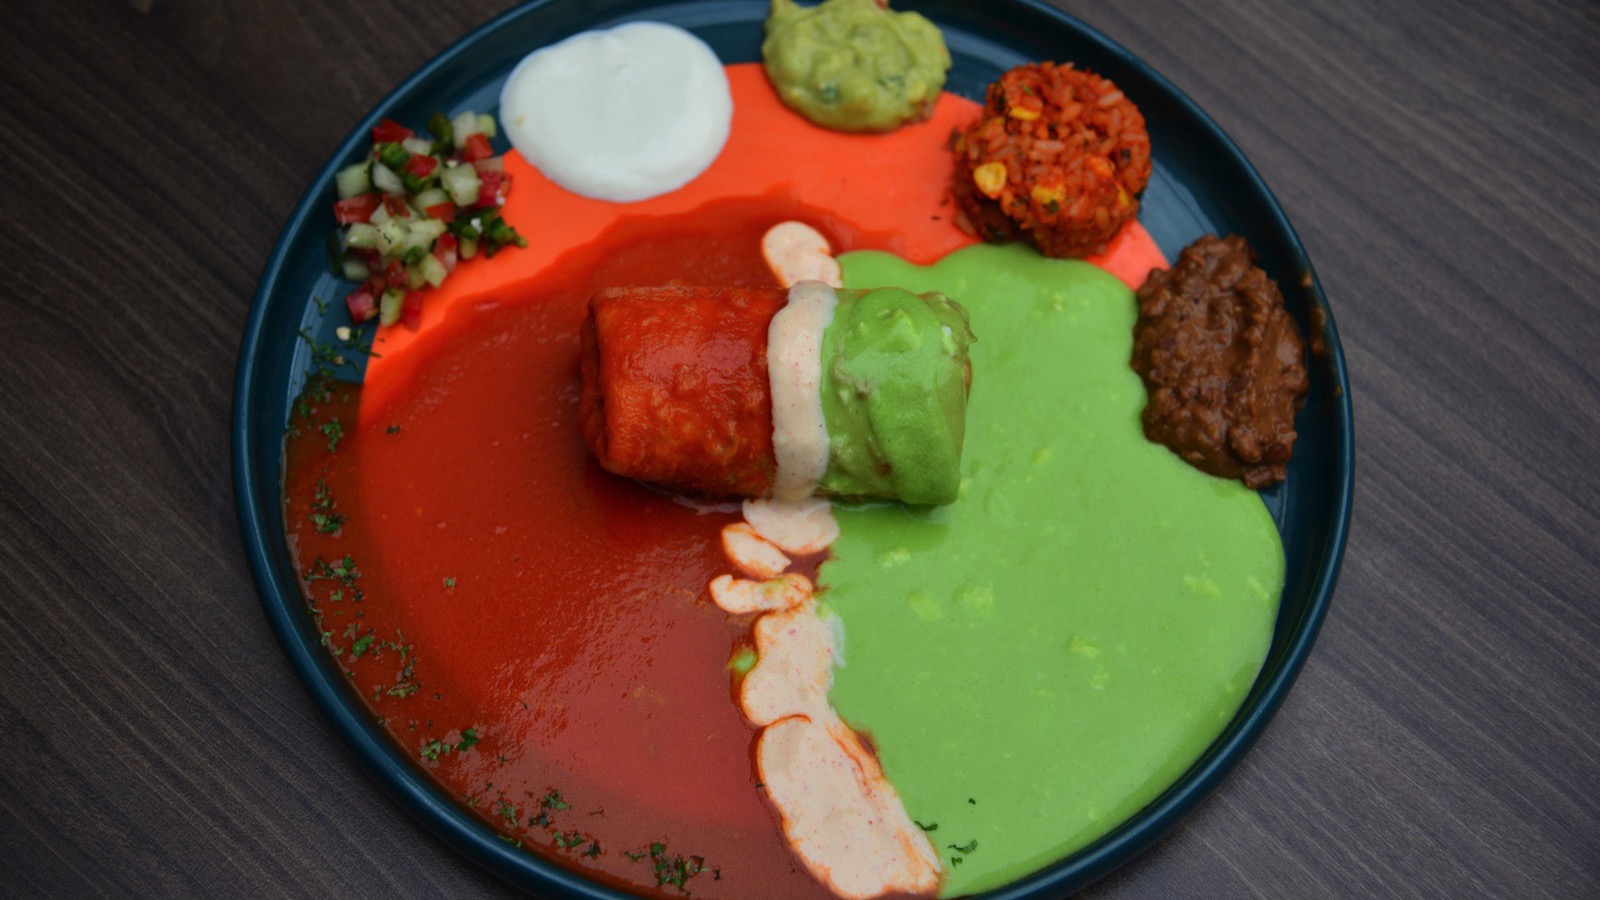 Chimichangas with Mexican condiments and sauces